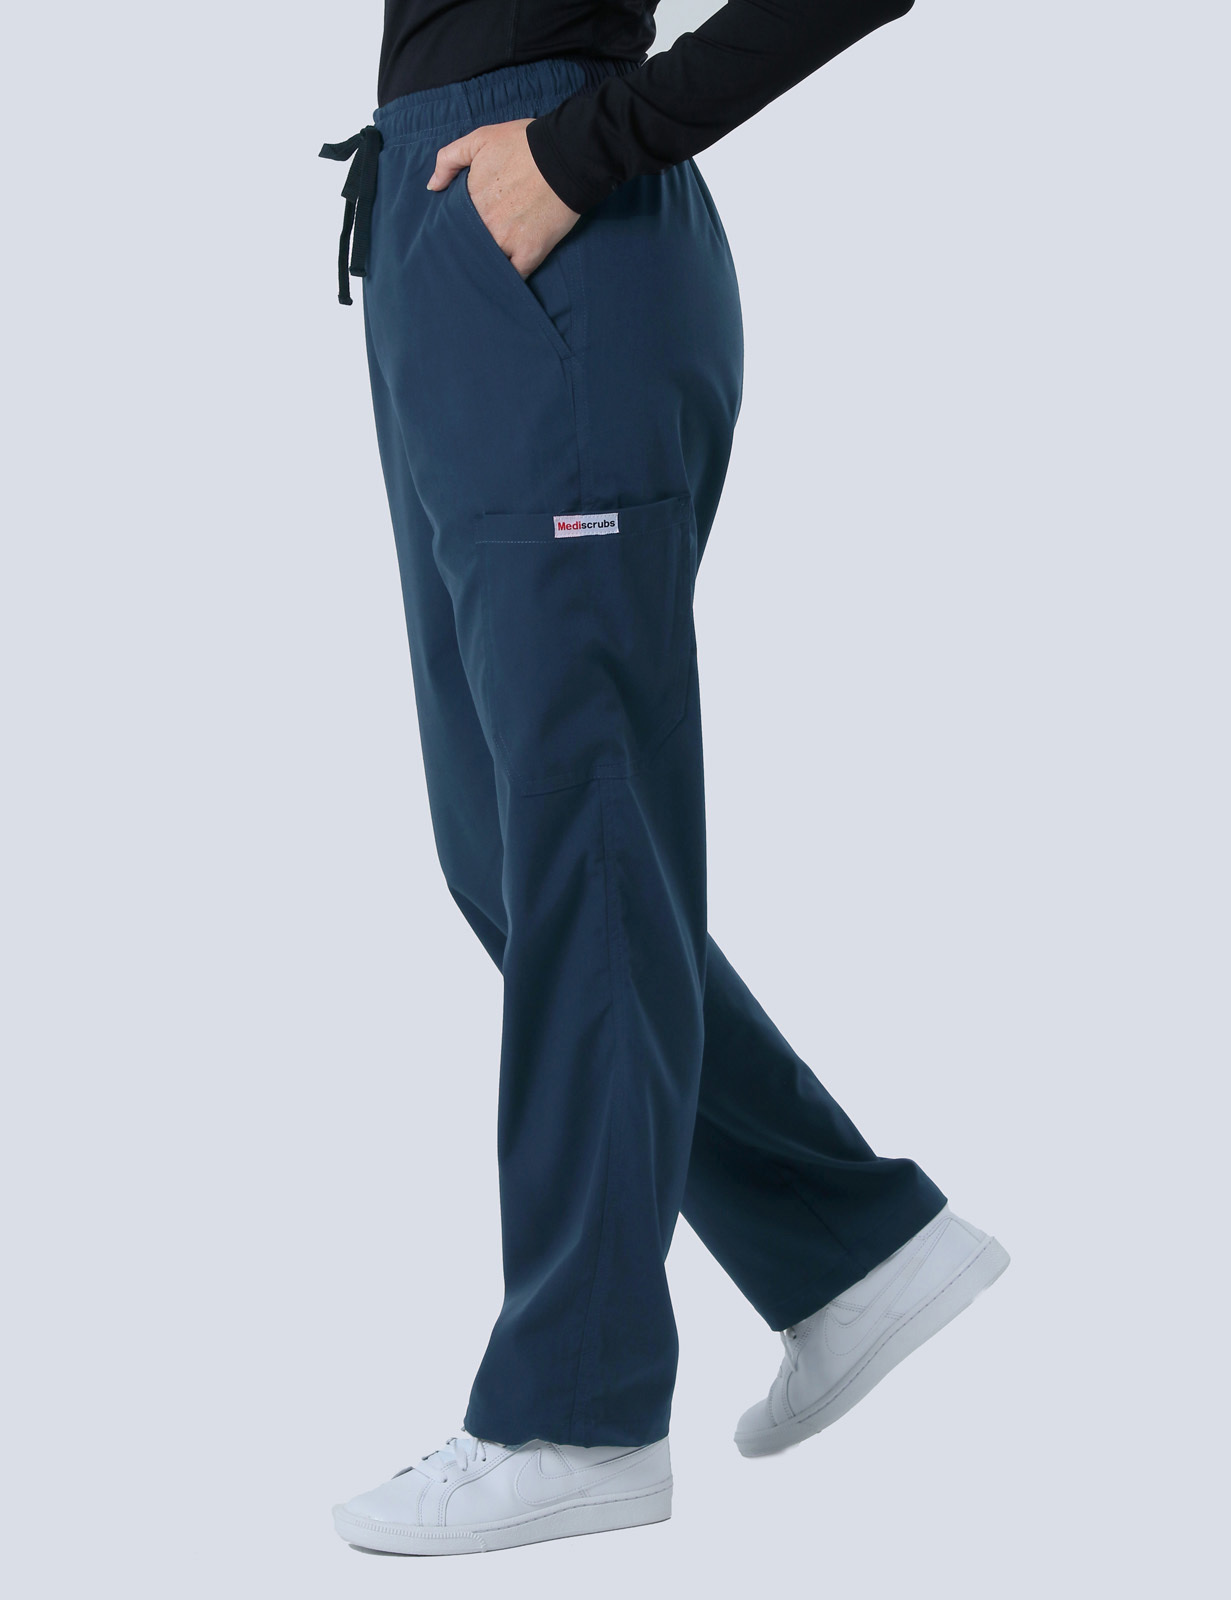 Royal Hobart Hospital Emergency Department Doctor Uniform Set Bundle (Women's Fit Solid Top and Cargo Pants in Navy incl Logo)